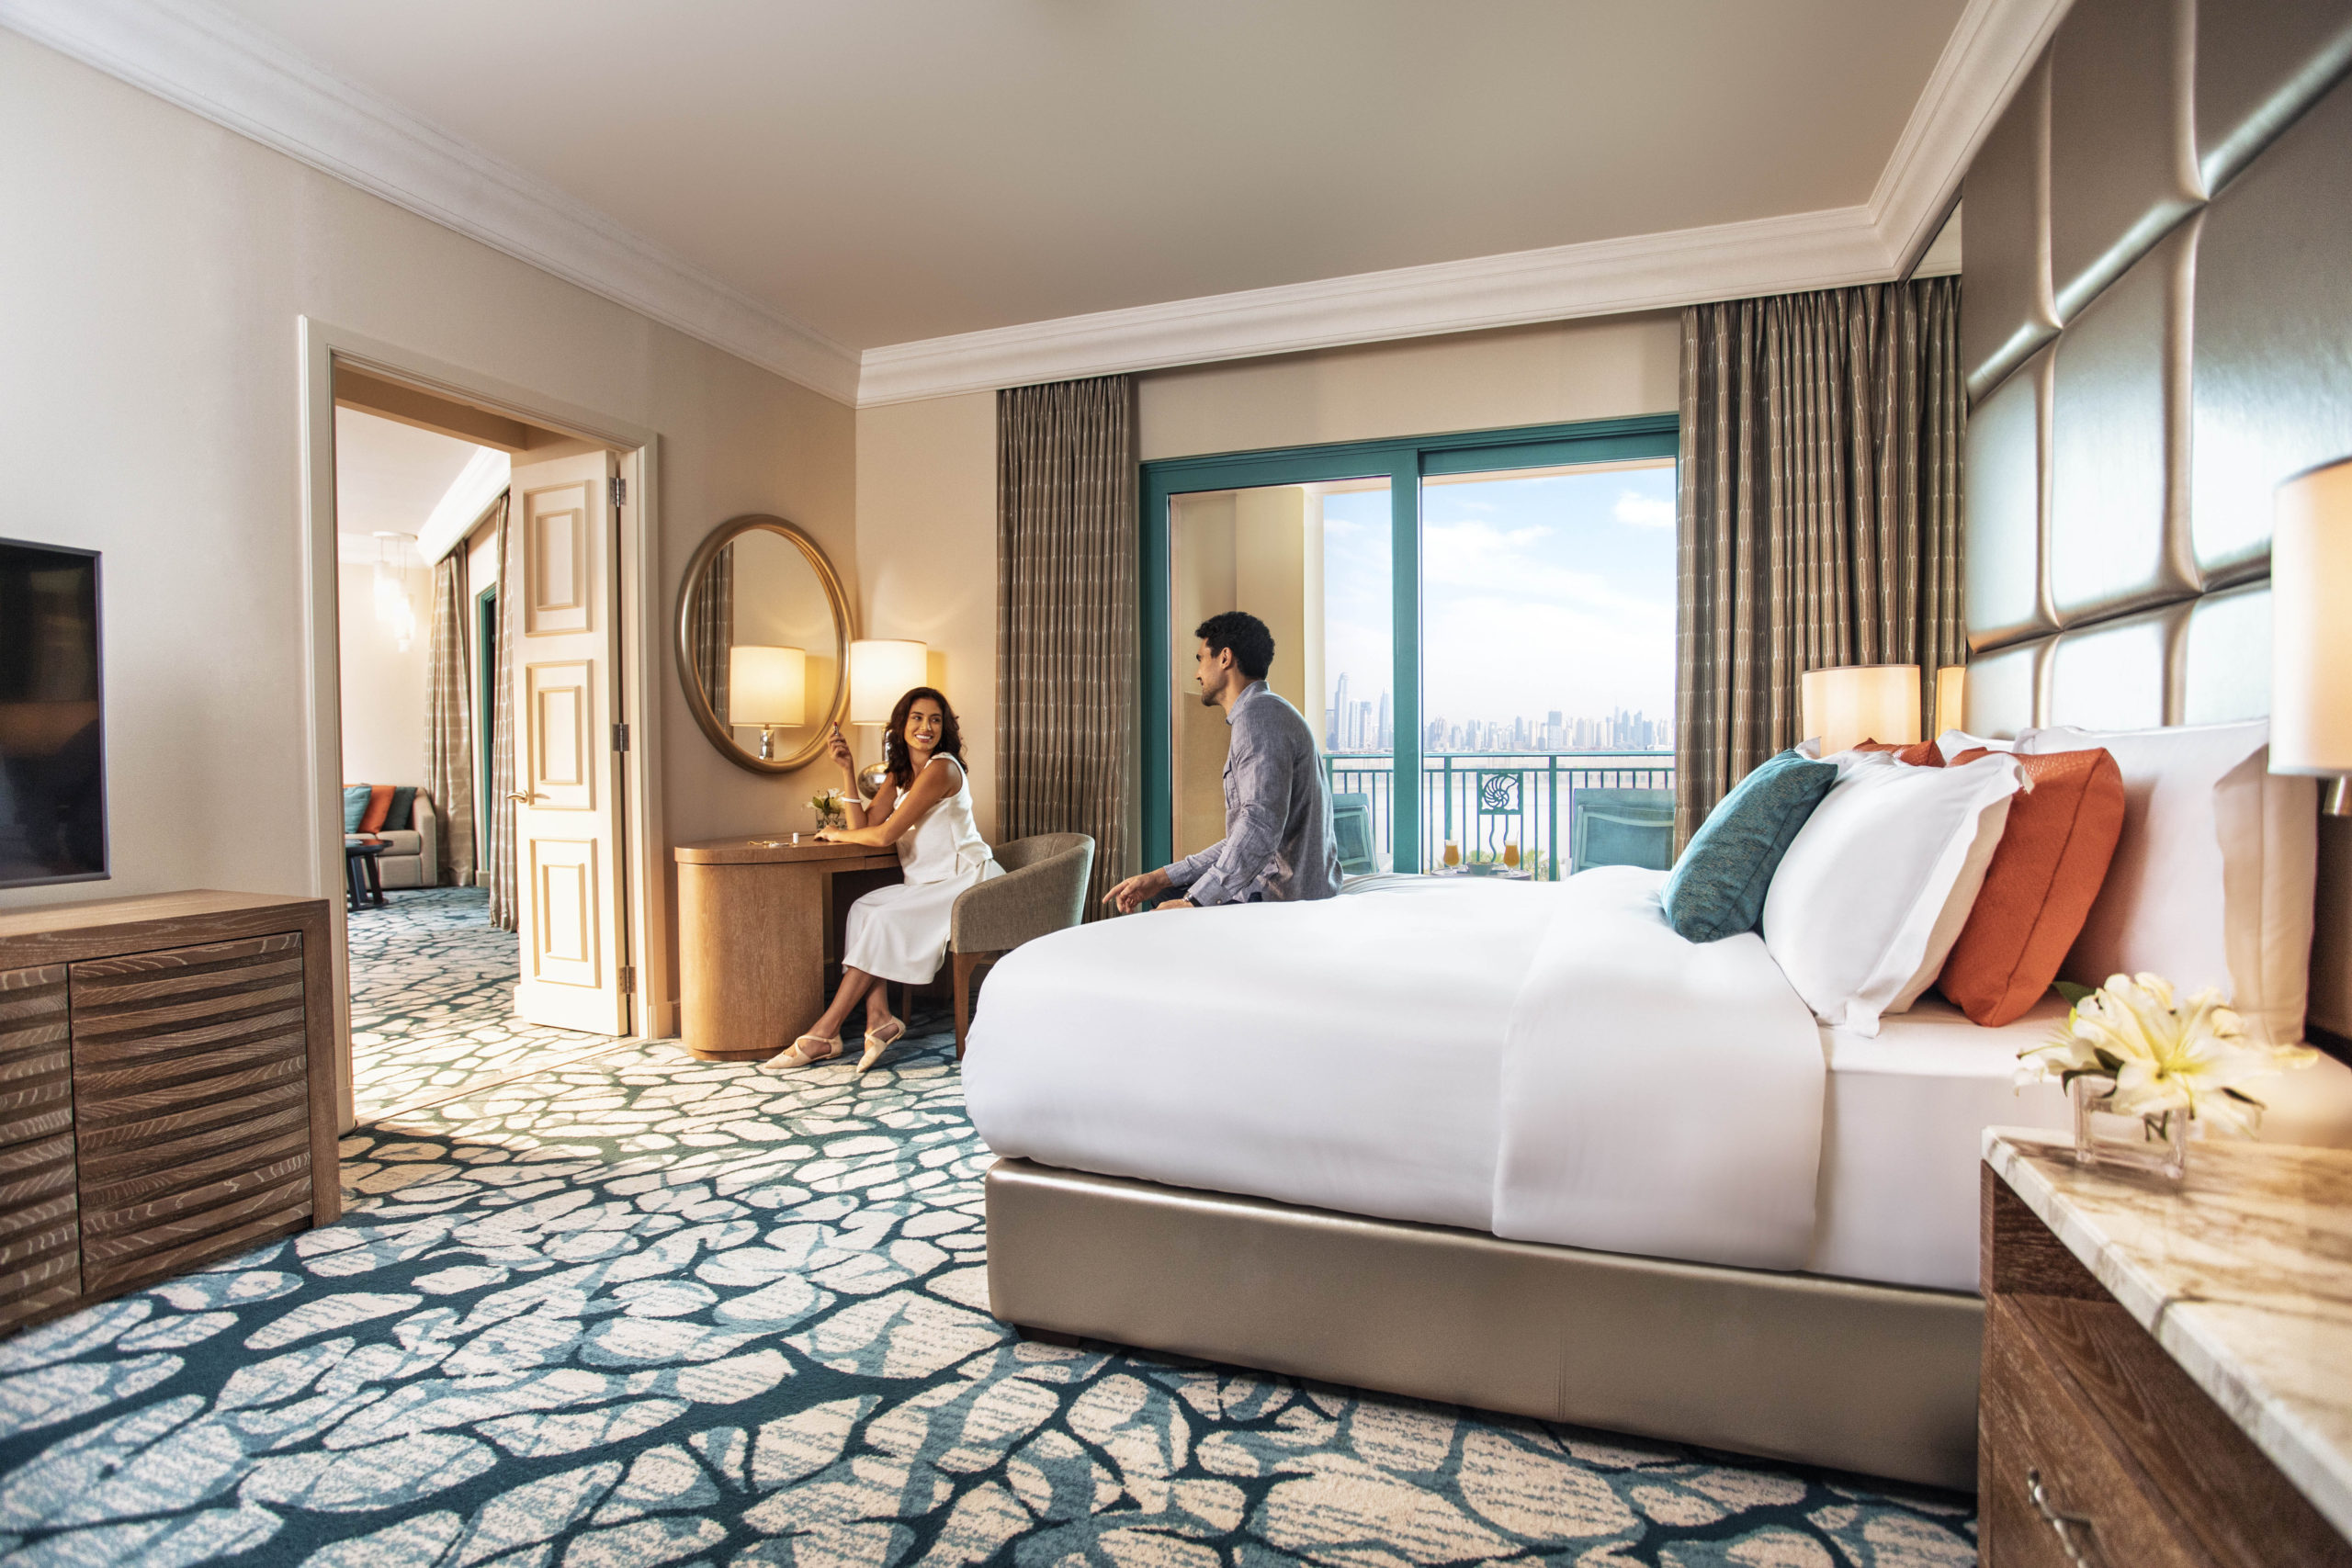 Image for Atlantis, The Palm Is The First Resort In The Middle East To Earn “Michelin Guide Equivalent” Accreditation For Post-Pandemic Hotel Safety Standards